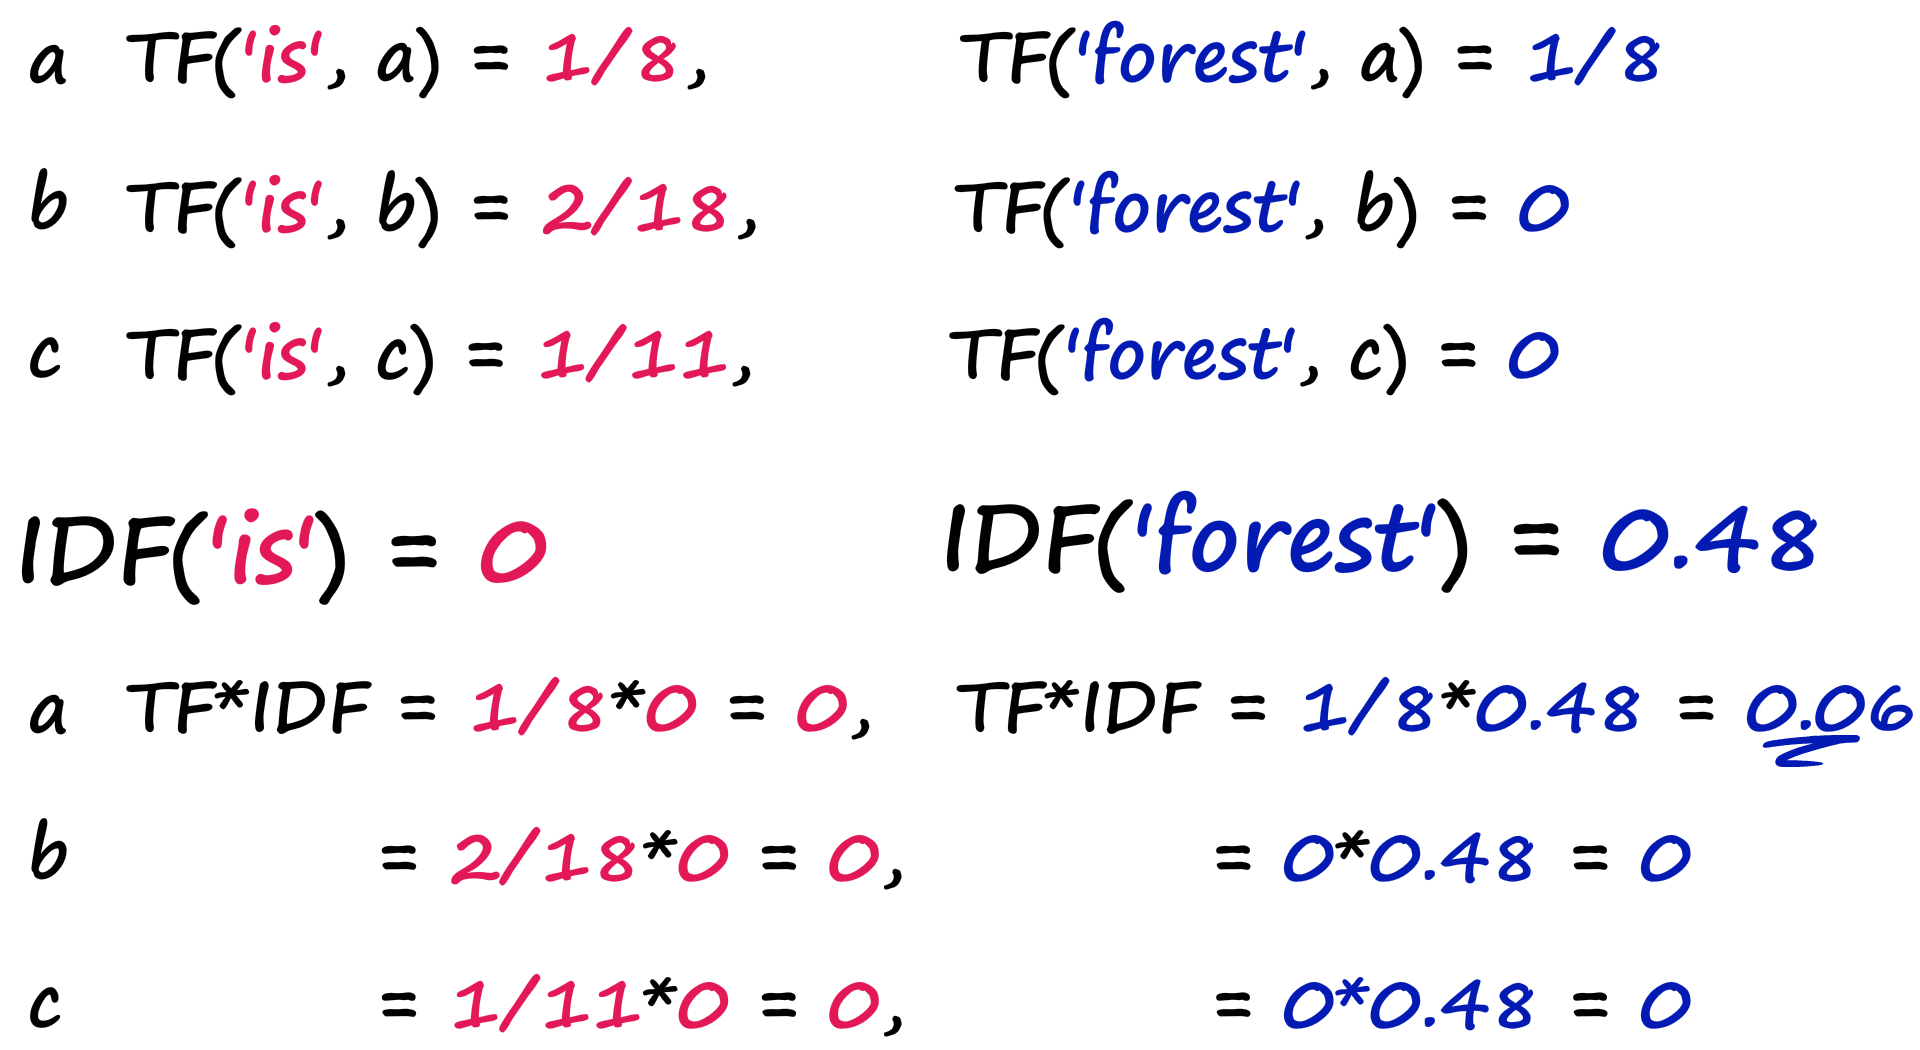 We calculate the TF(‘is’, D) and TF(‘forest’, D) scores for docs a, b, and c.